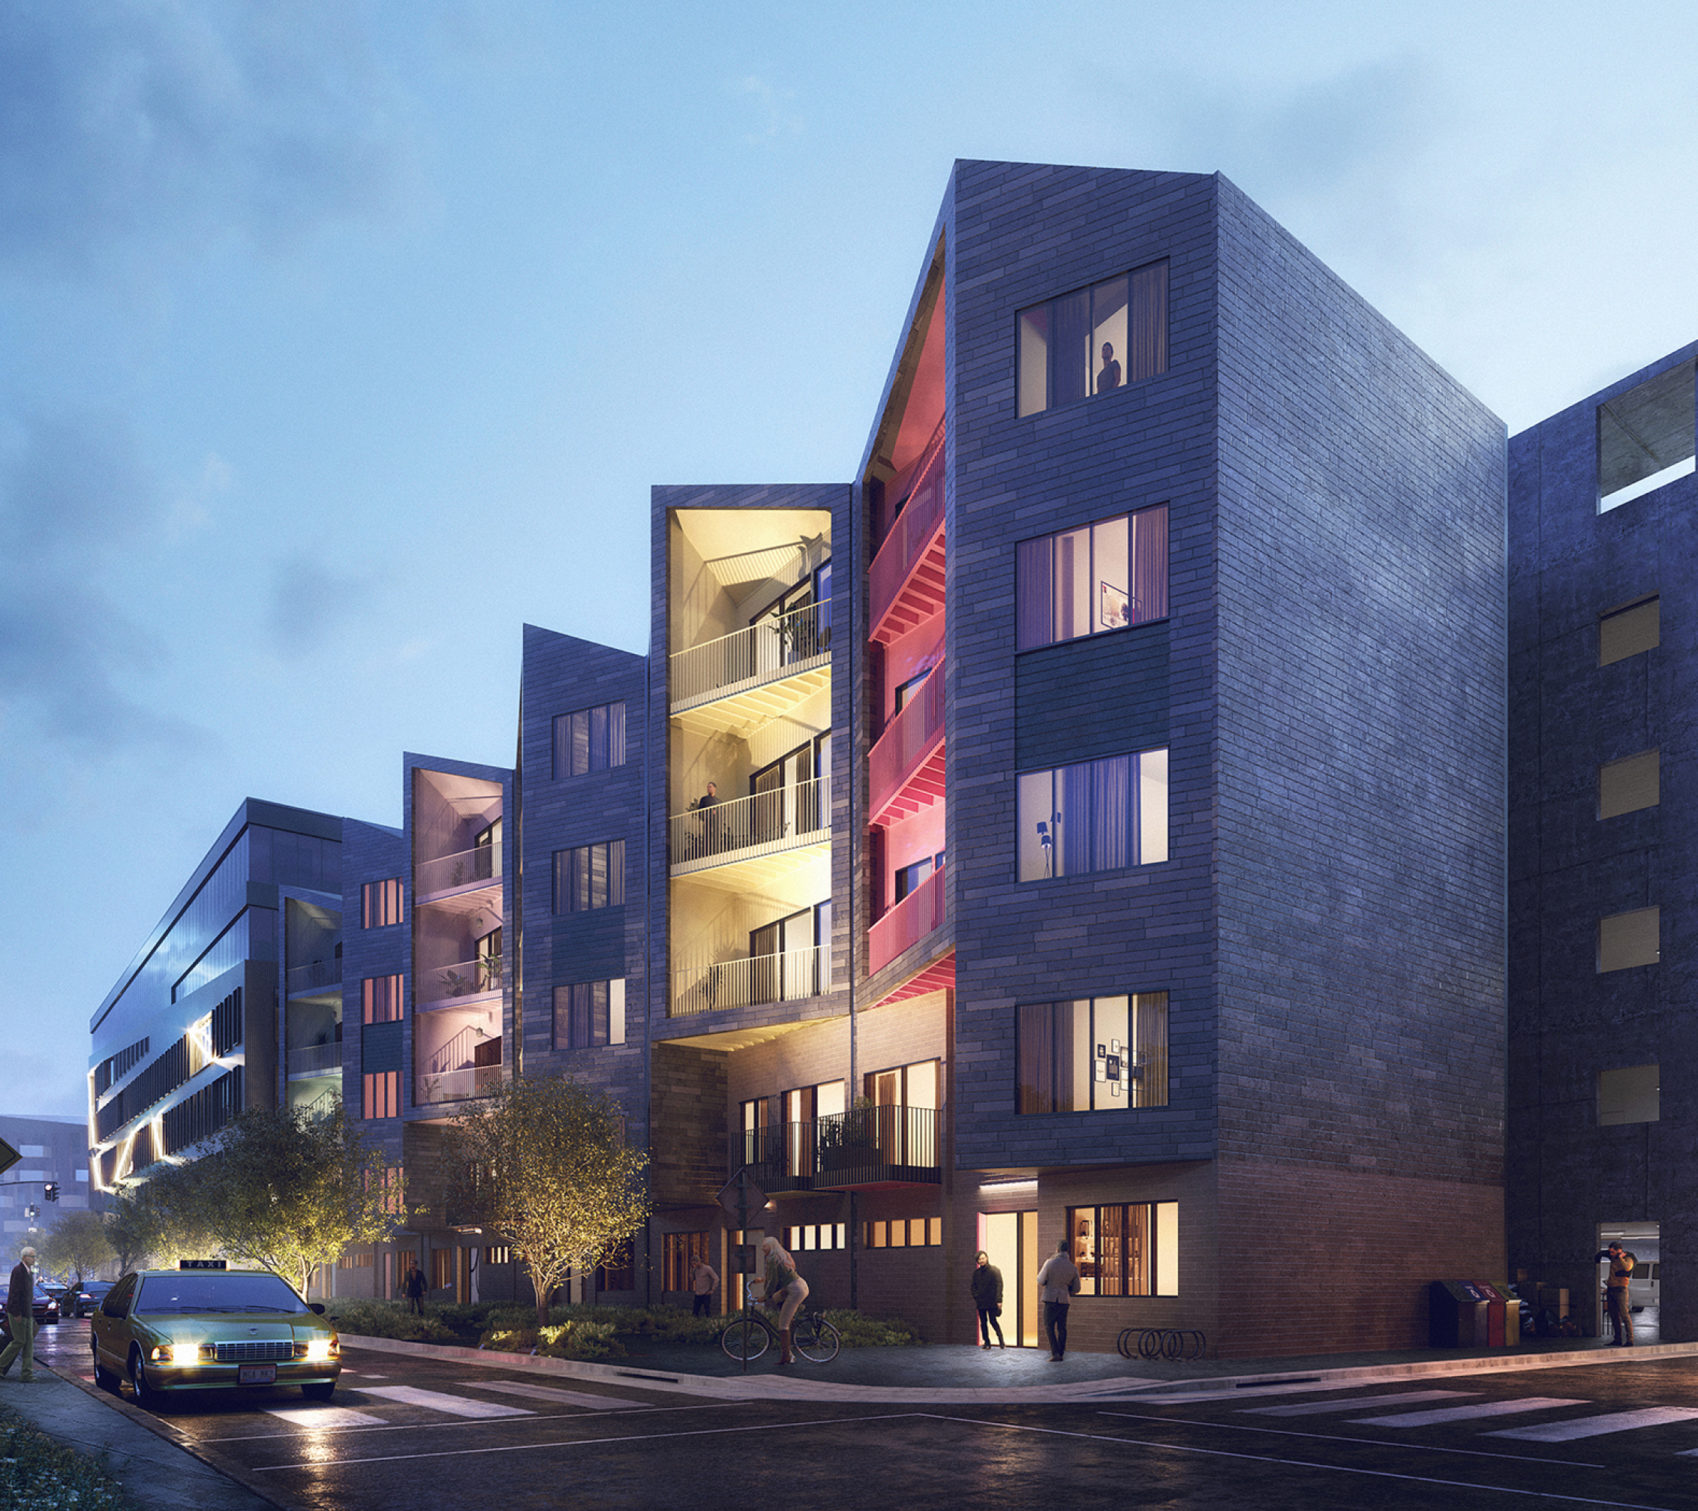 Gravity Building E: Urban townhome living on McDowell St in Columbus, Ohio. Sophisticated options, full amenities, and a community-focused lifestyle.